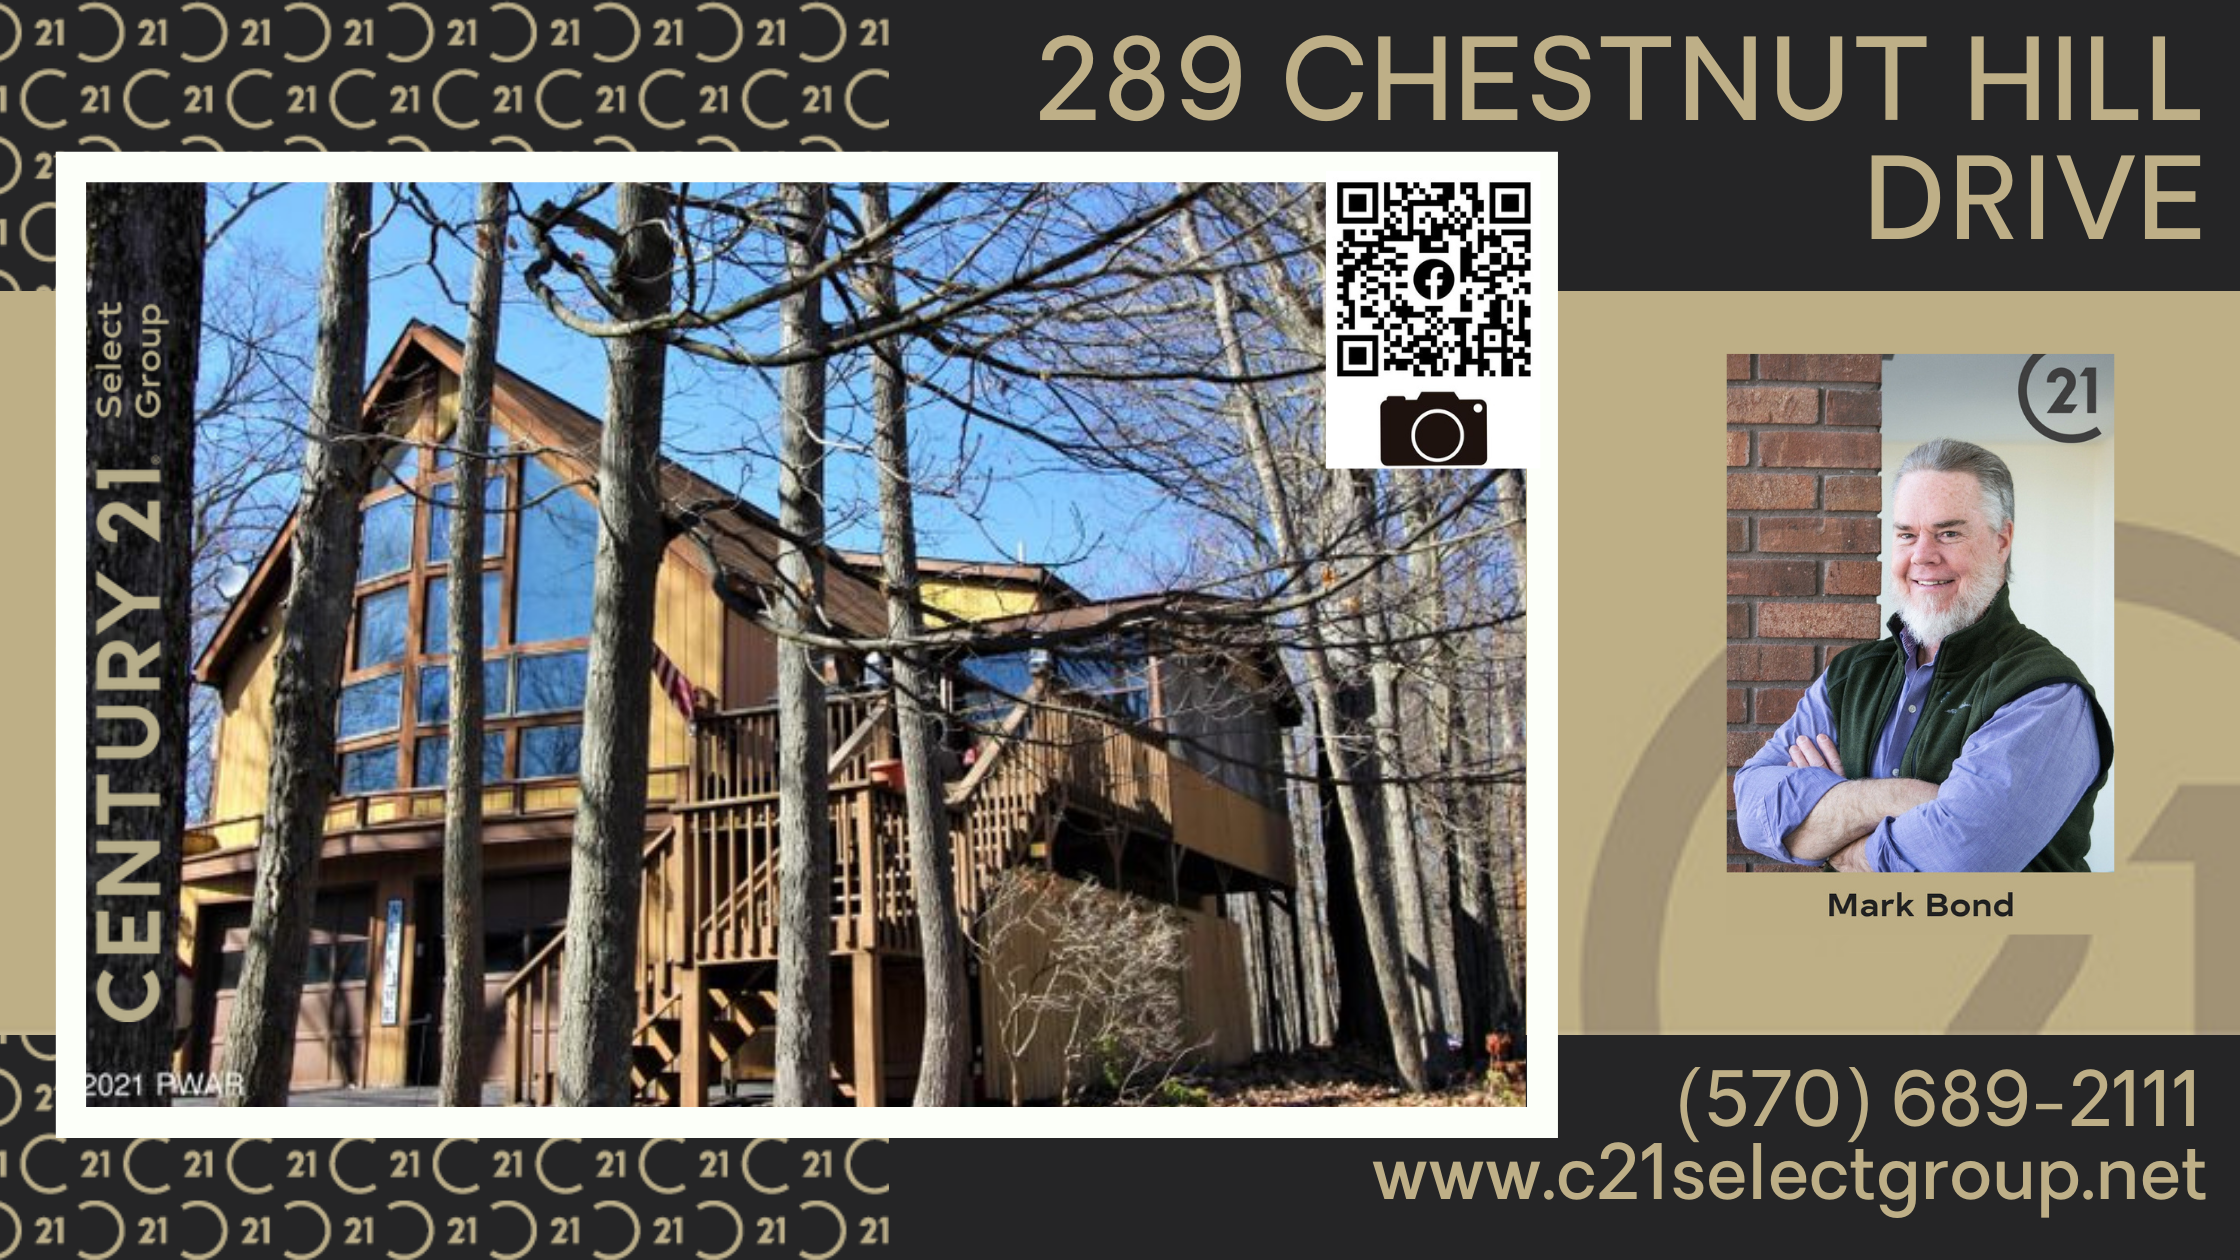 NEW PRICE! 289 Chestnut Hill Drive: Stately Hideout Chalet with Bonus Suite